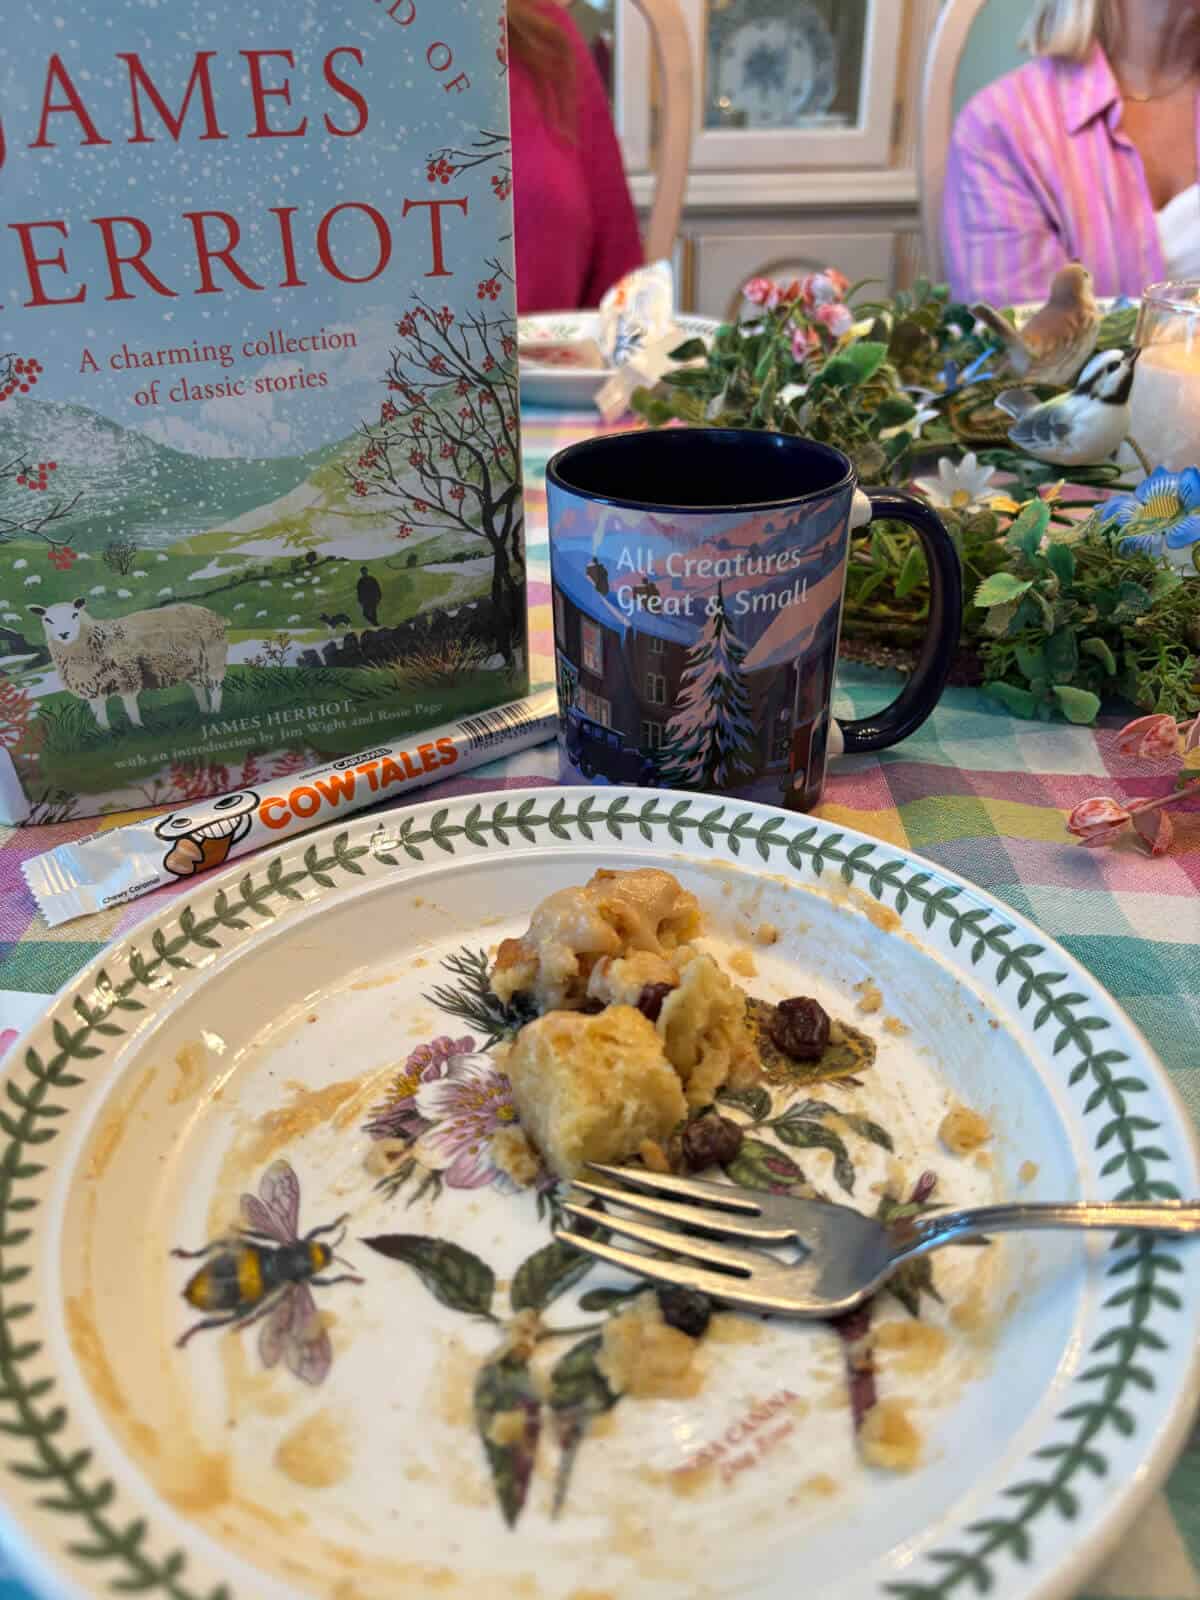 A plate of mostly eaten bread pudding with an All Creatures Great and Small coffee mug and the book "The Wonderful World of James Herriot"